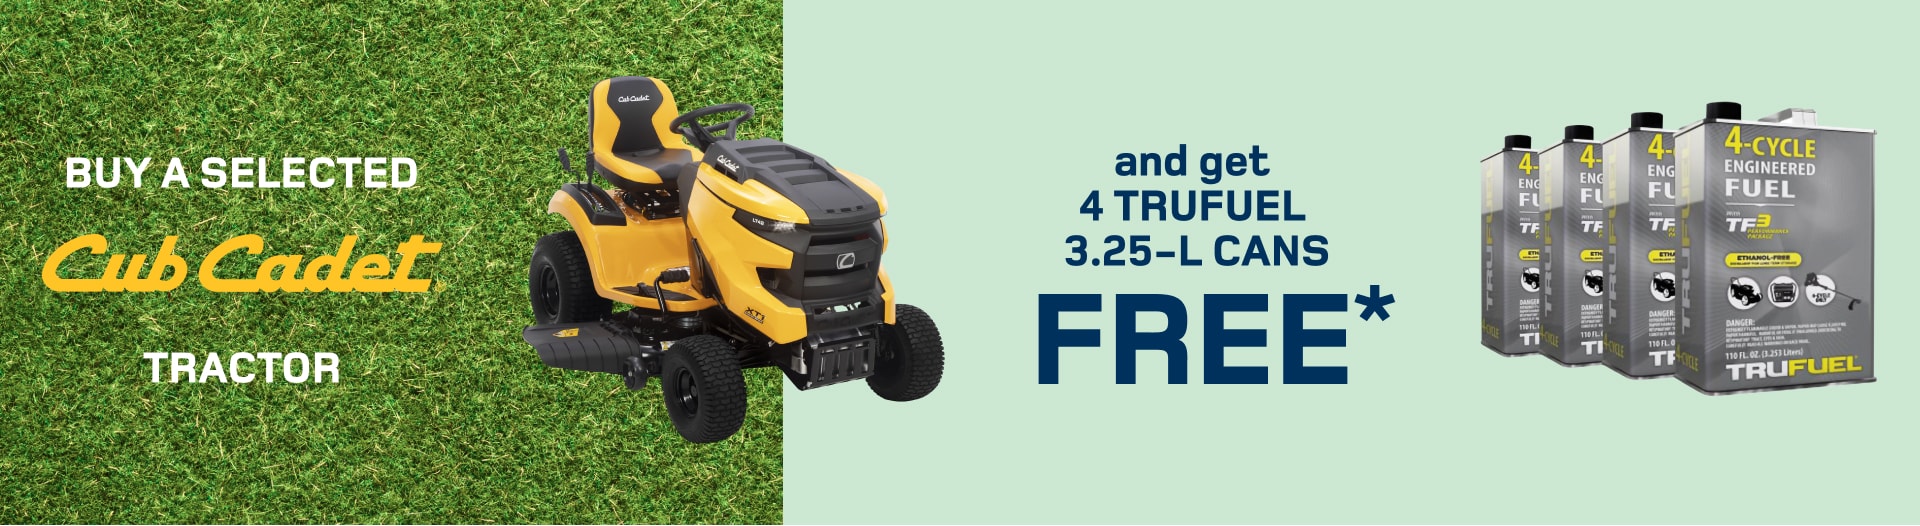 Promotion: Free fuel with the purchase of a selected Cub Cadet tractor 